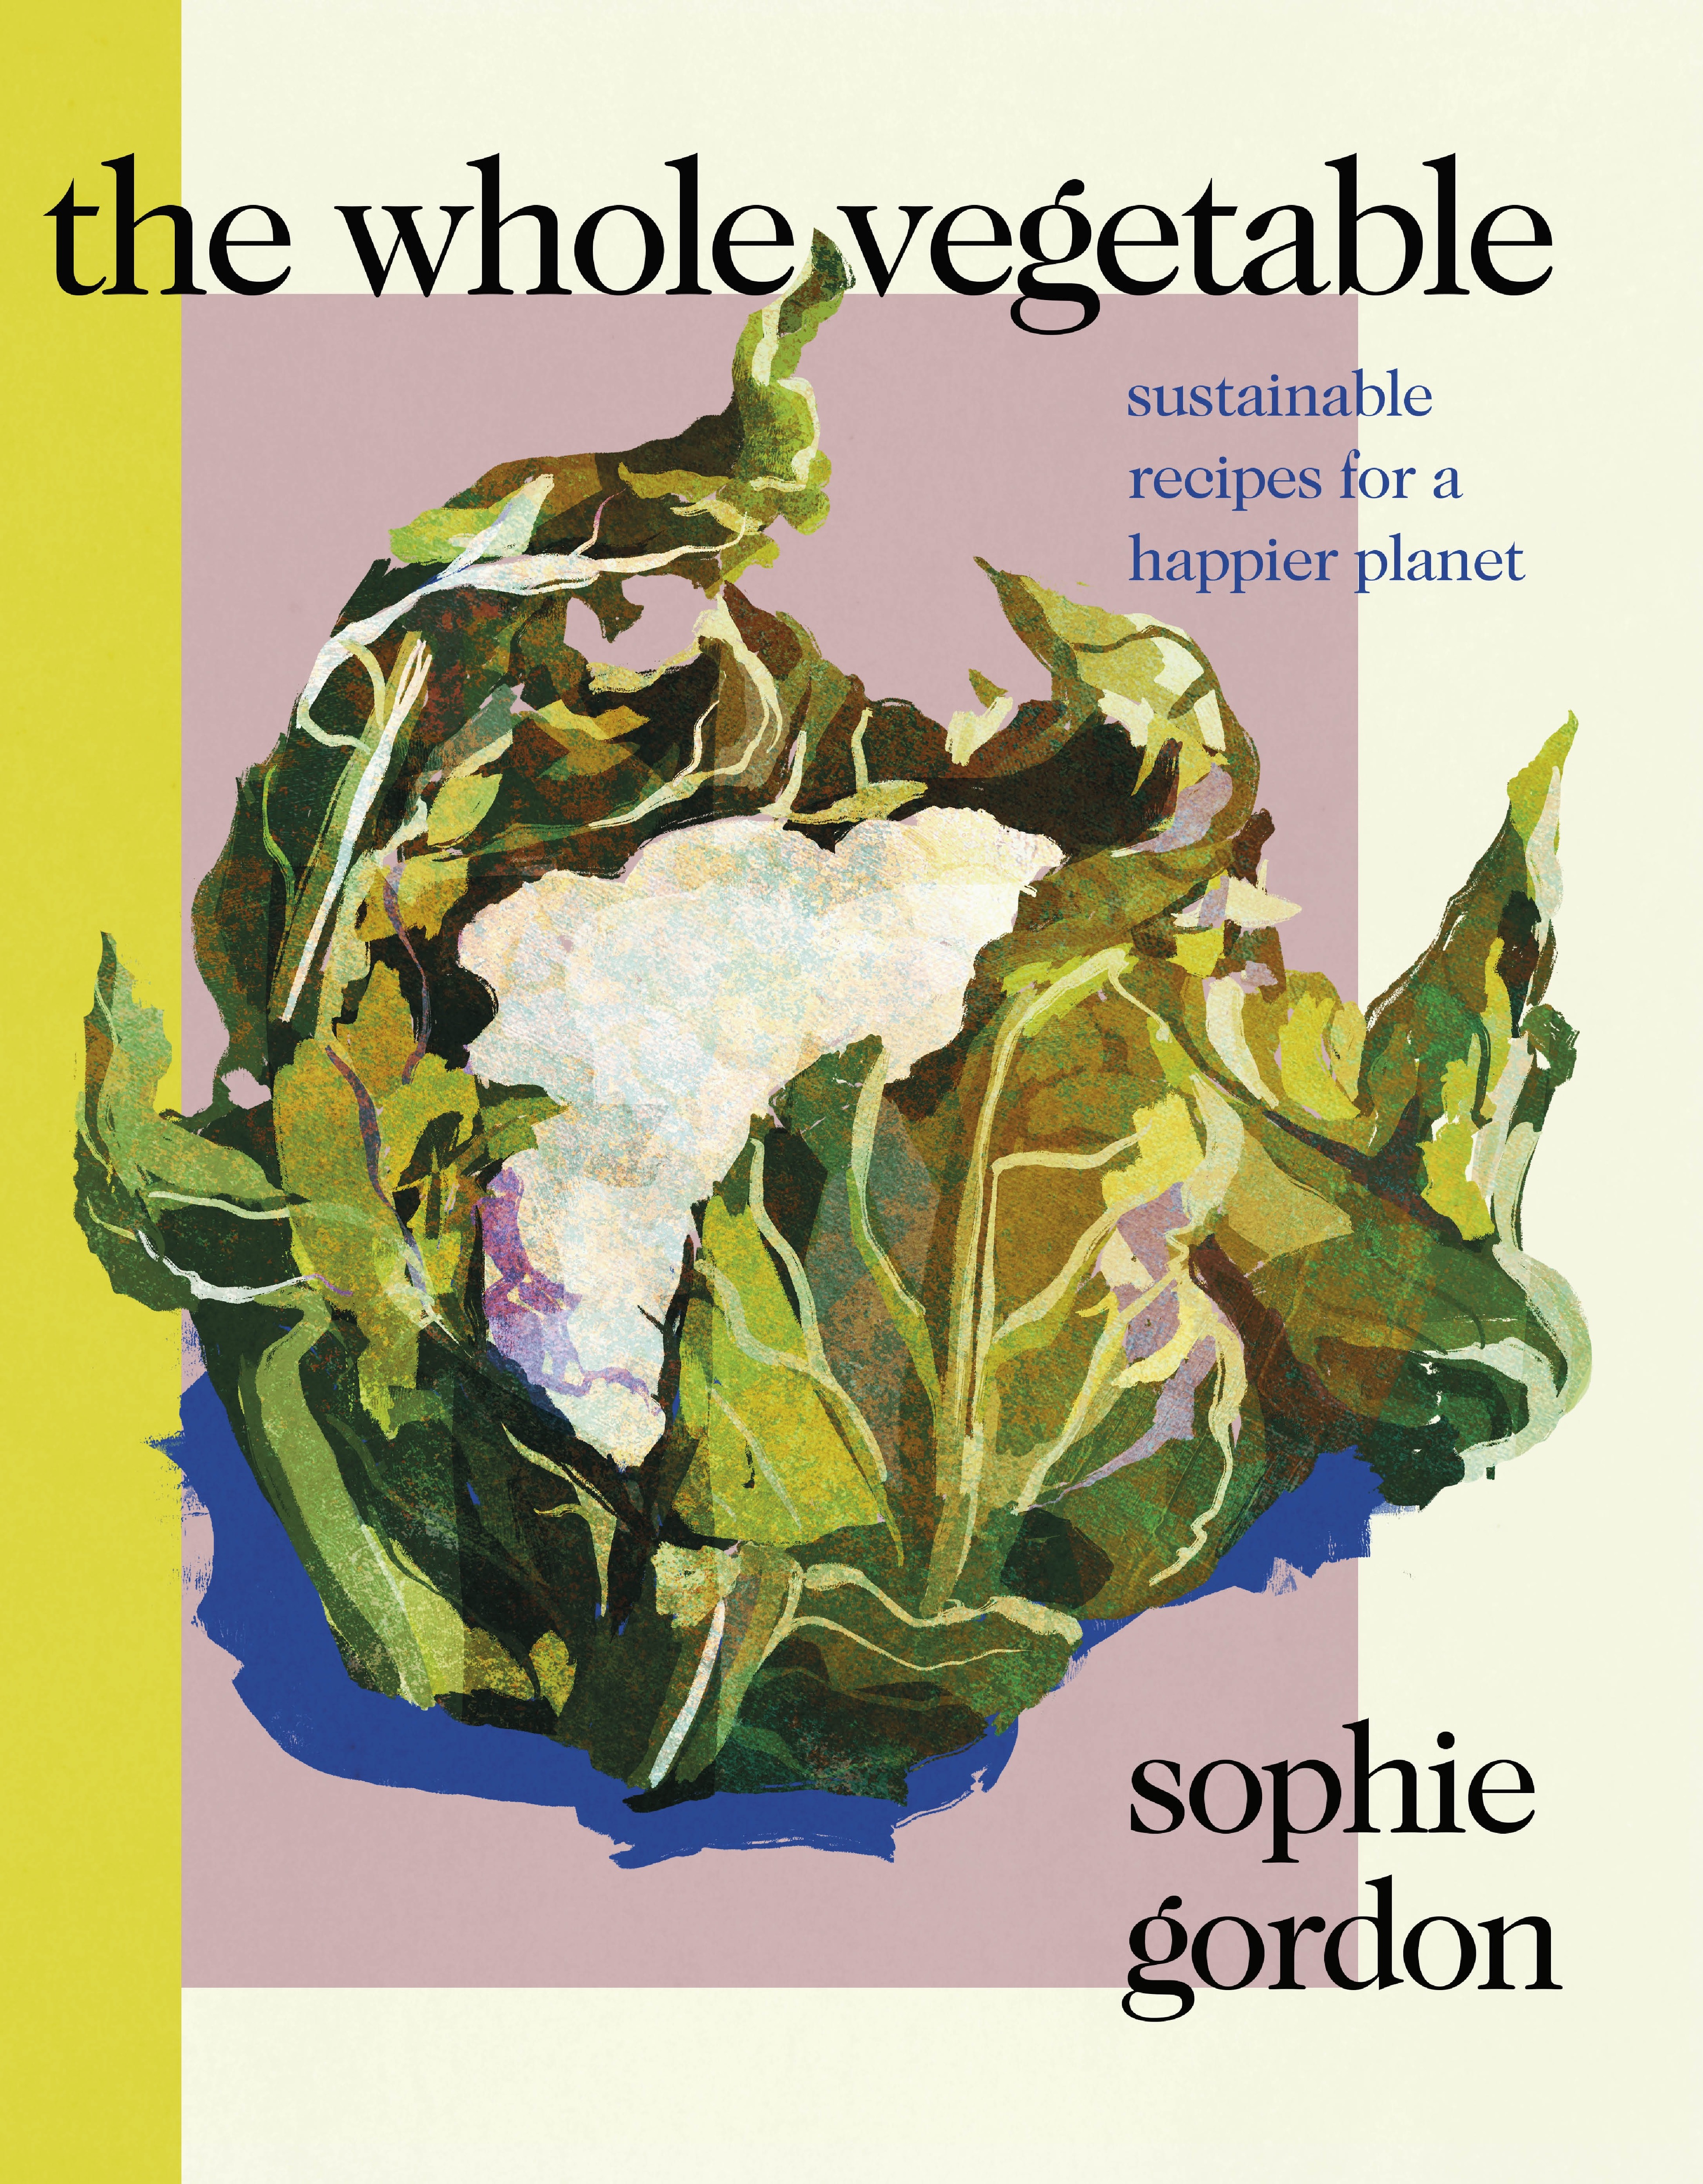 The Whole Vegetable recipe book